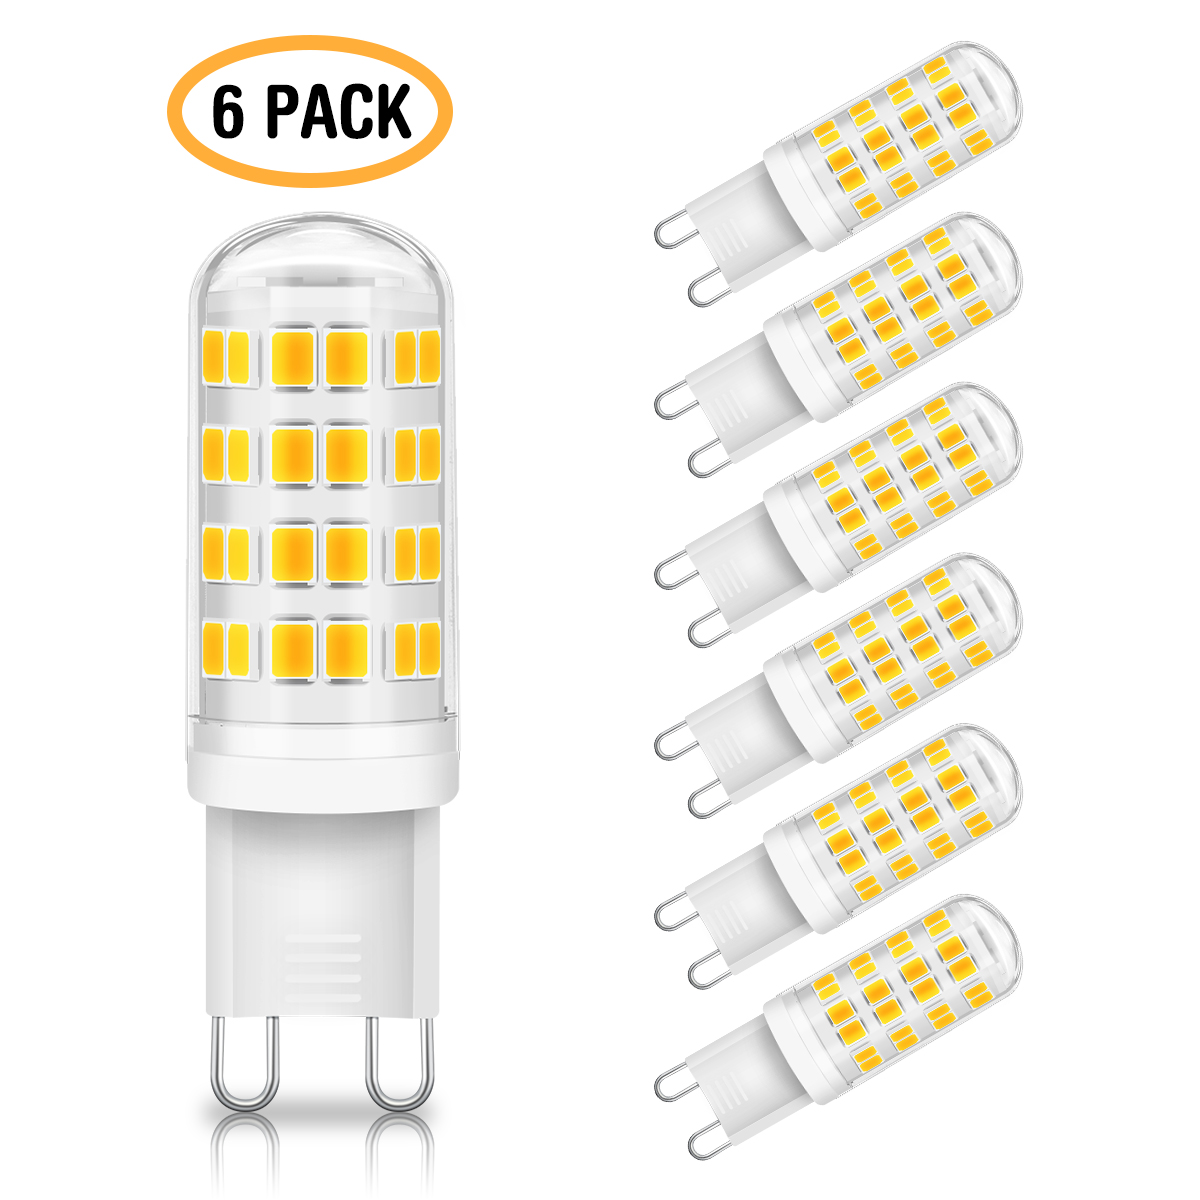 Kingso-6Pcs-6W-3000K-500lm-G9-LED-Bulb-with-52pcs-2835-Lamp-Beads-for-Living-Room-Bedroom-Kitchen-Di-1890738-1